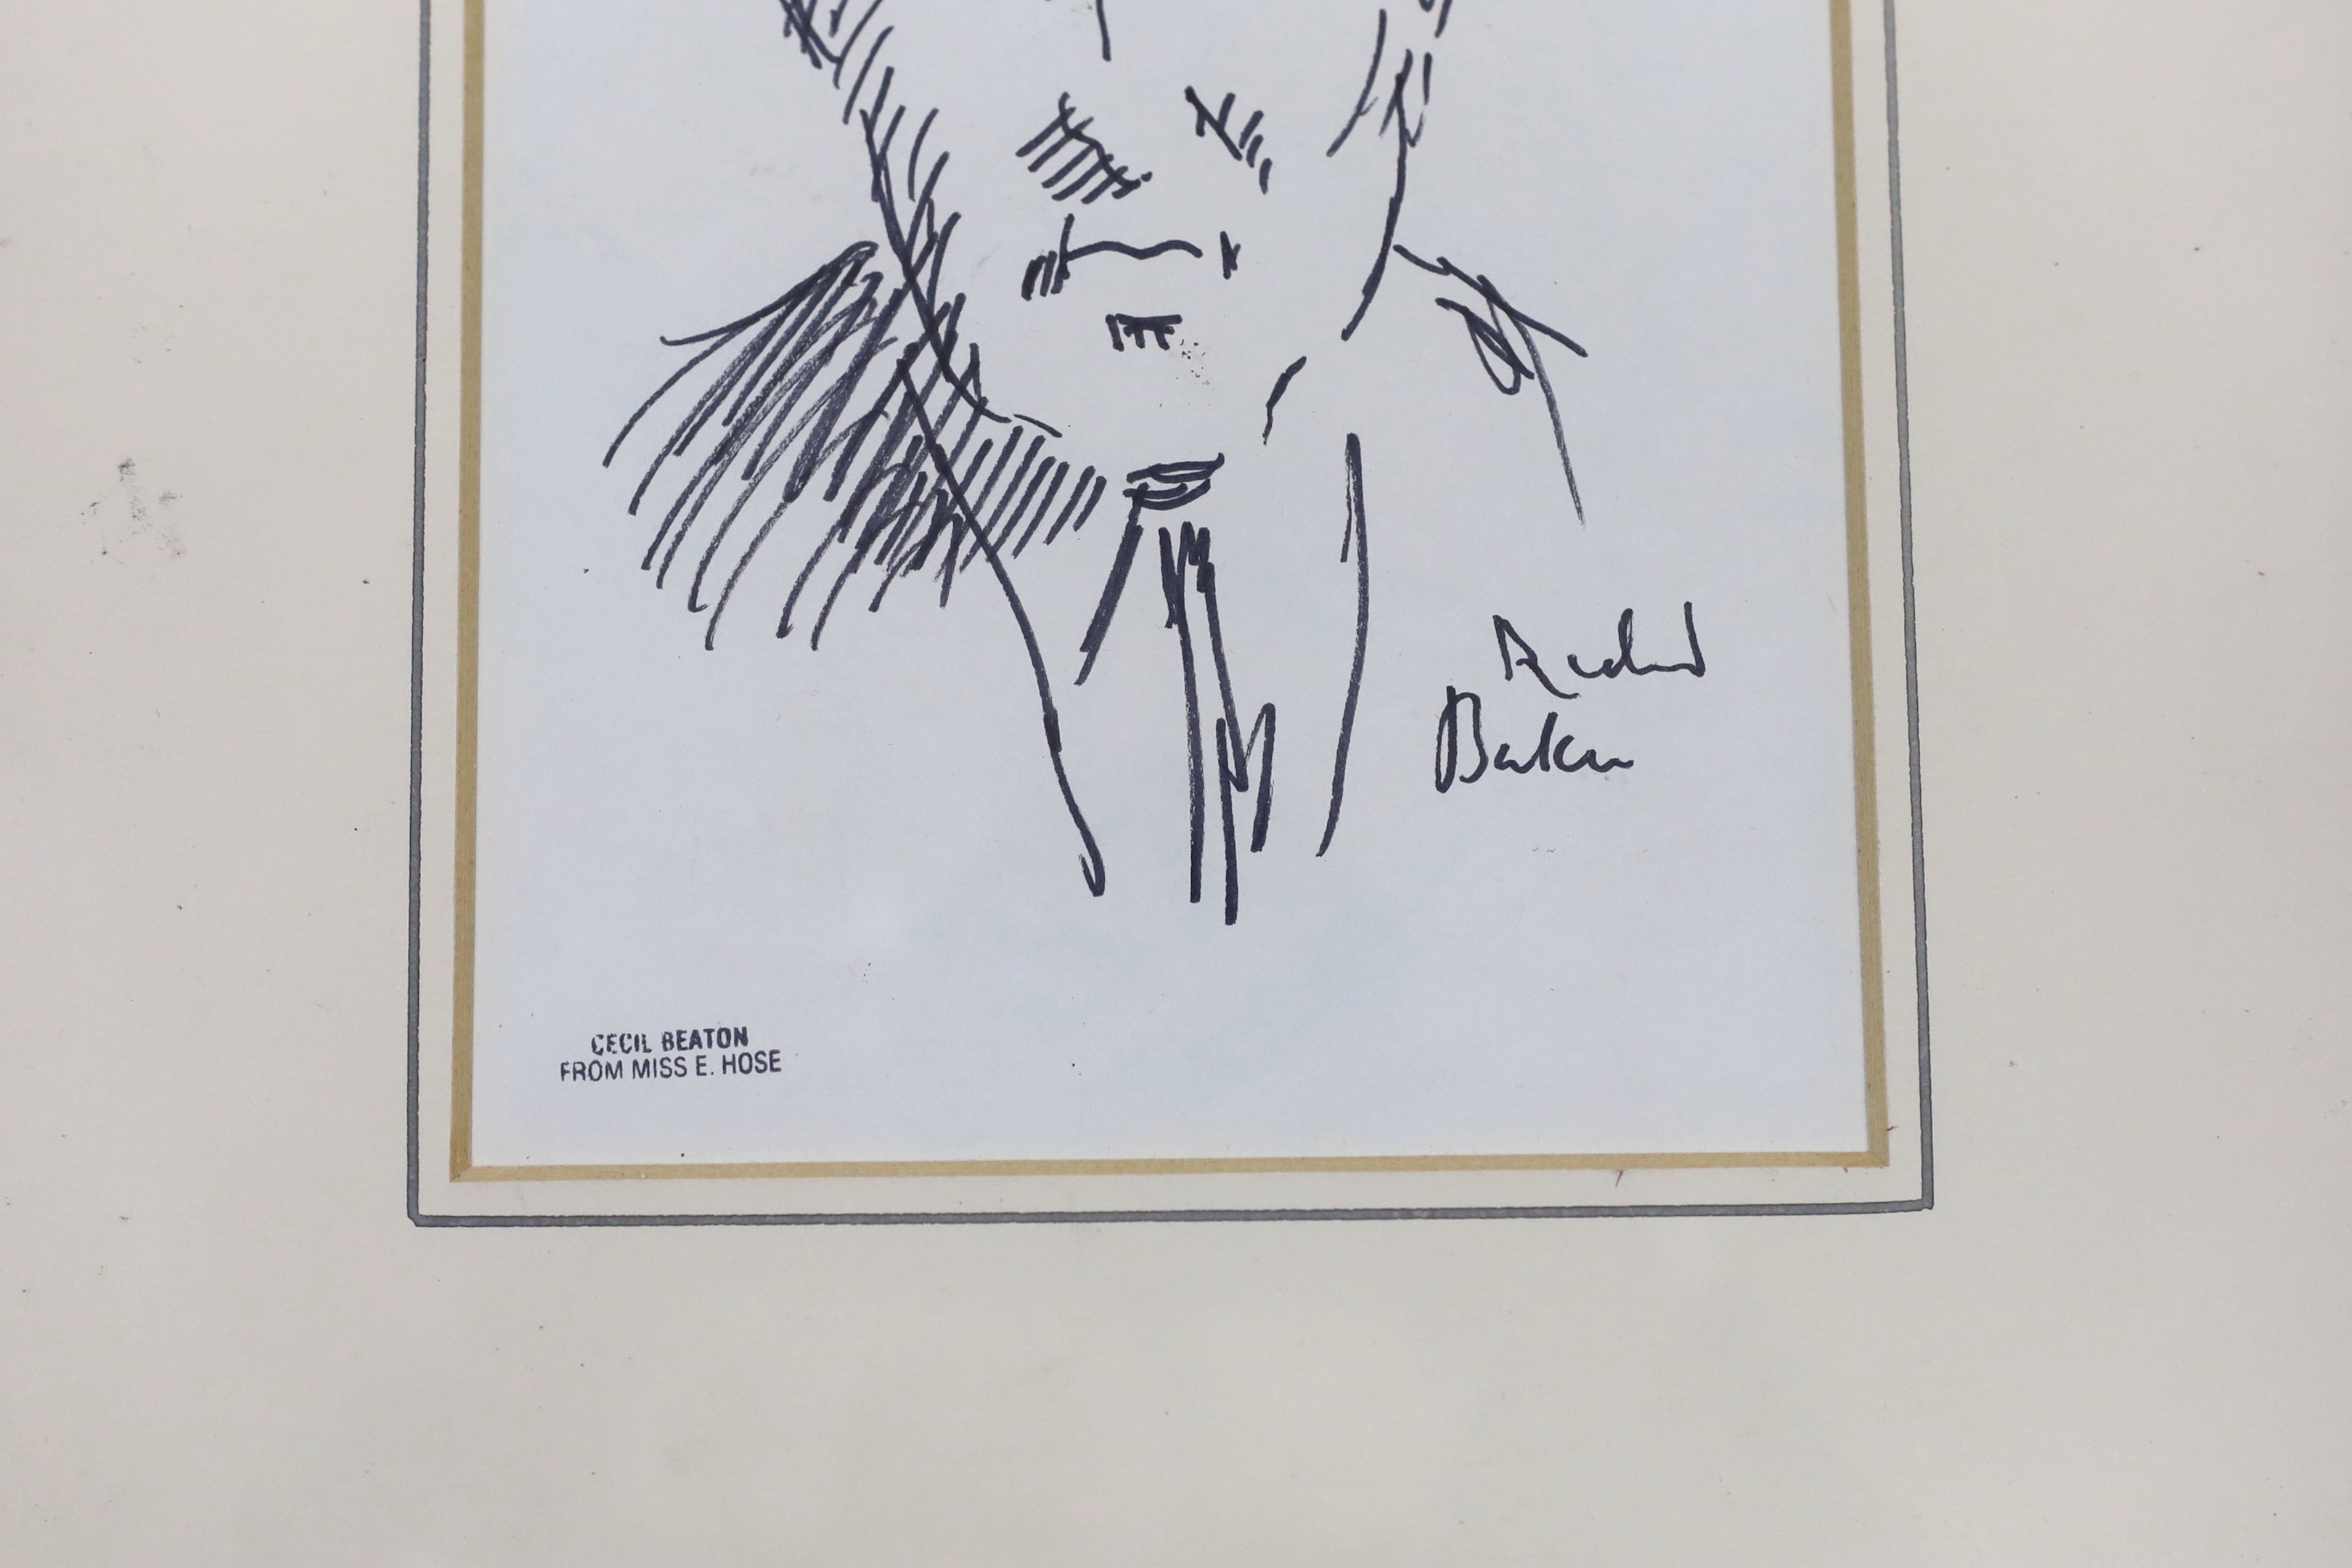 Cecil Beaton (1904-1980), pen and ink sketch, Portrait of newsreader Richard Baker, inscribed, with ‘Cecil Beaton from Miss E Hose’ stamp and pencil sketches verso, 19 x 12cm